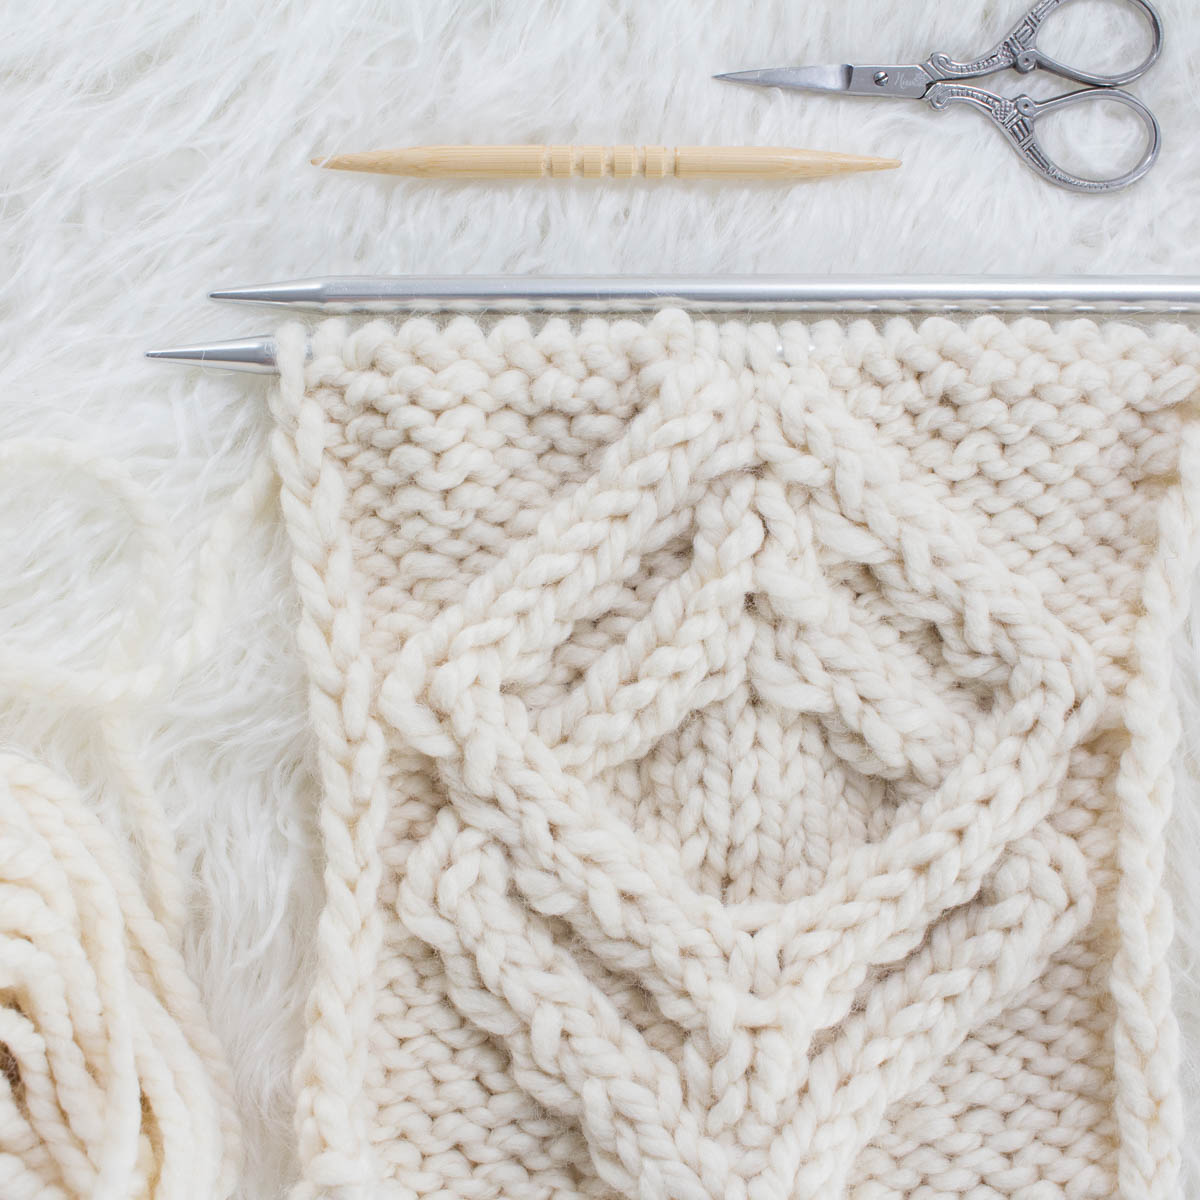 Wavy stitch knit pattern for beginners and advanced knitters